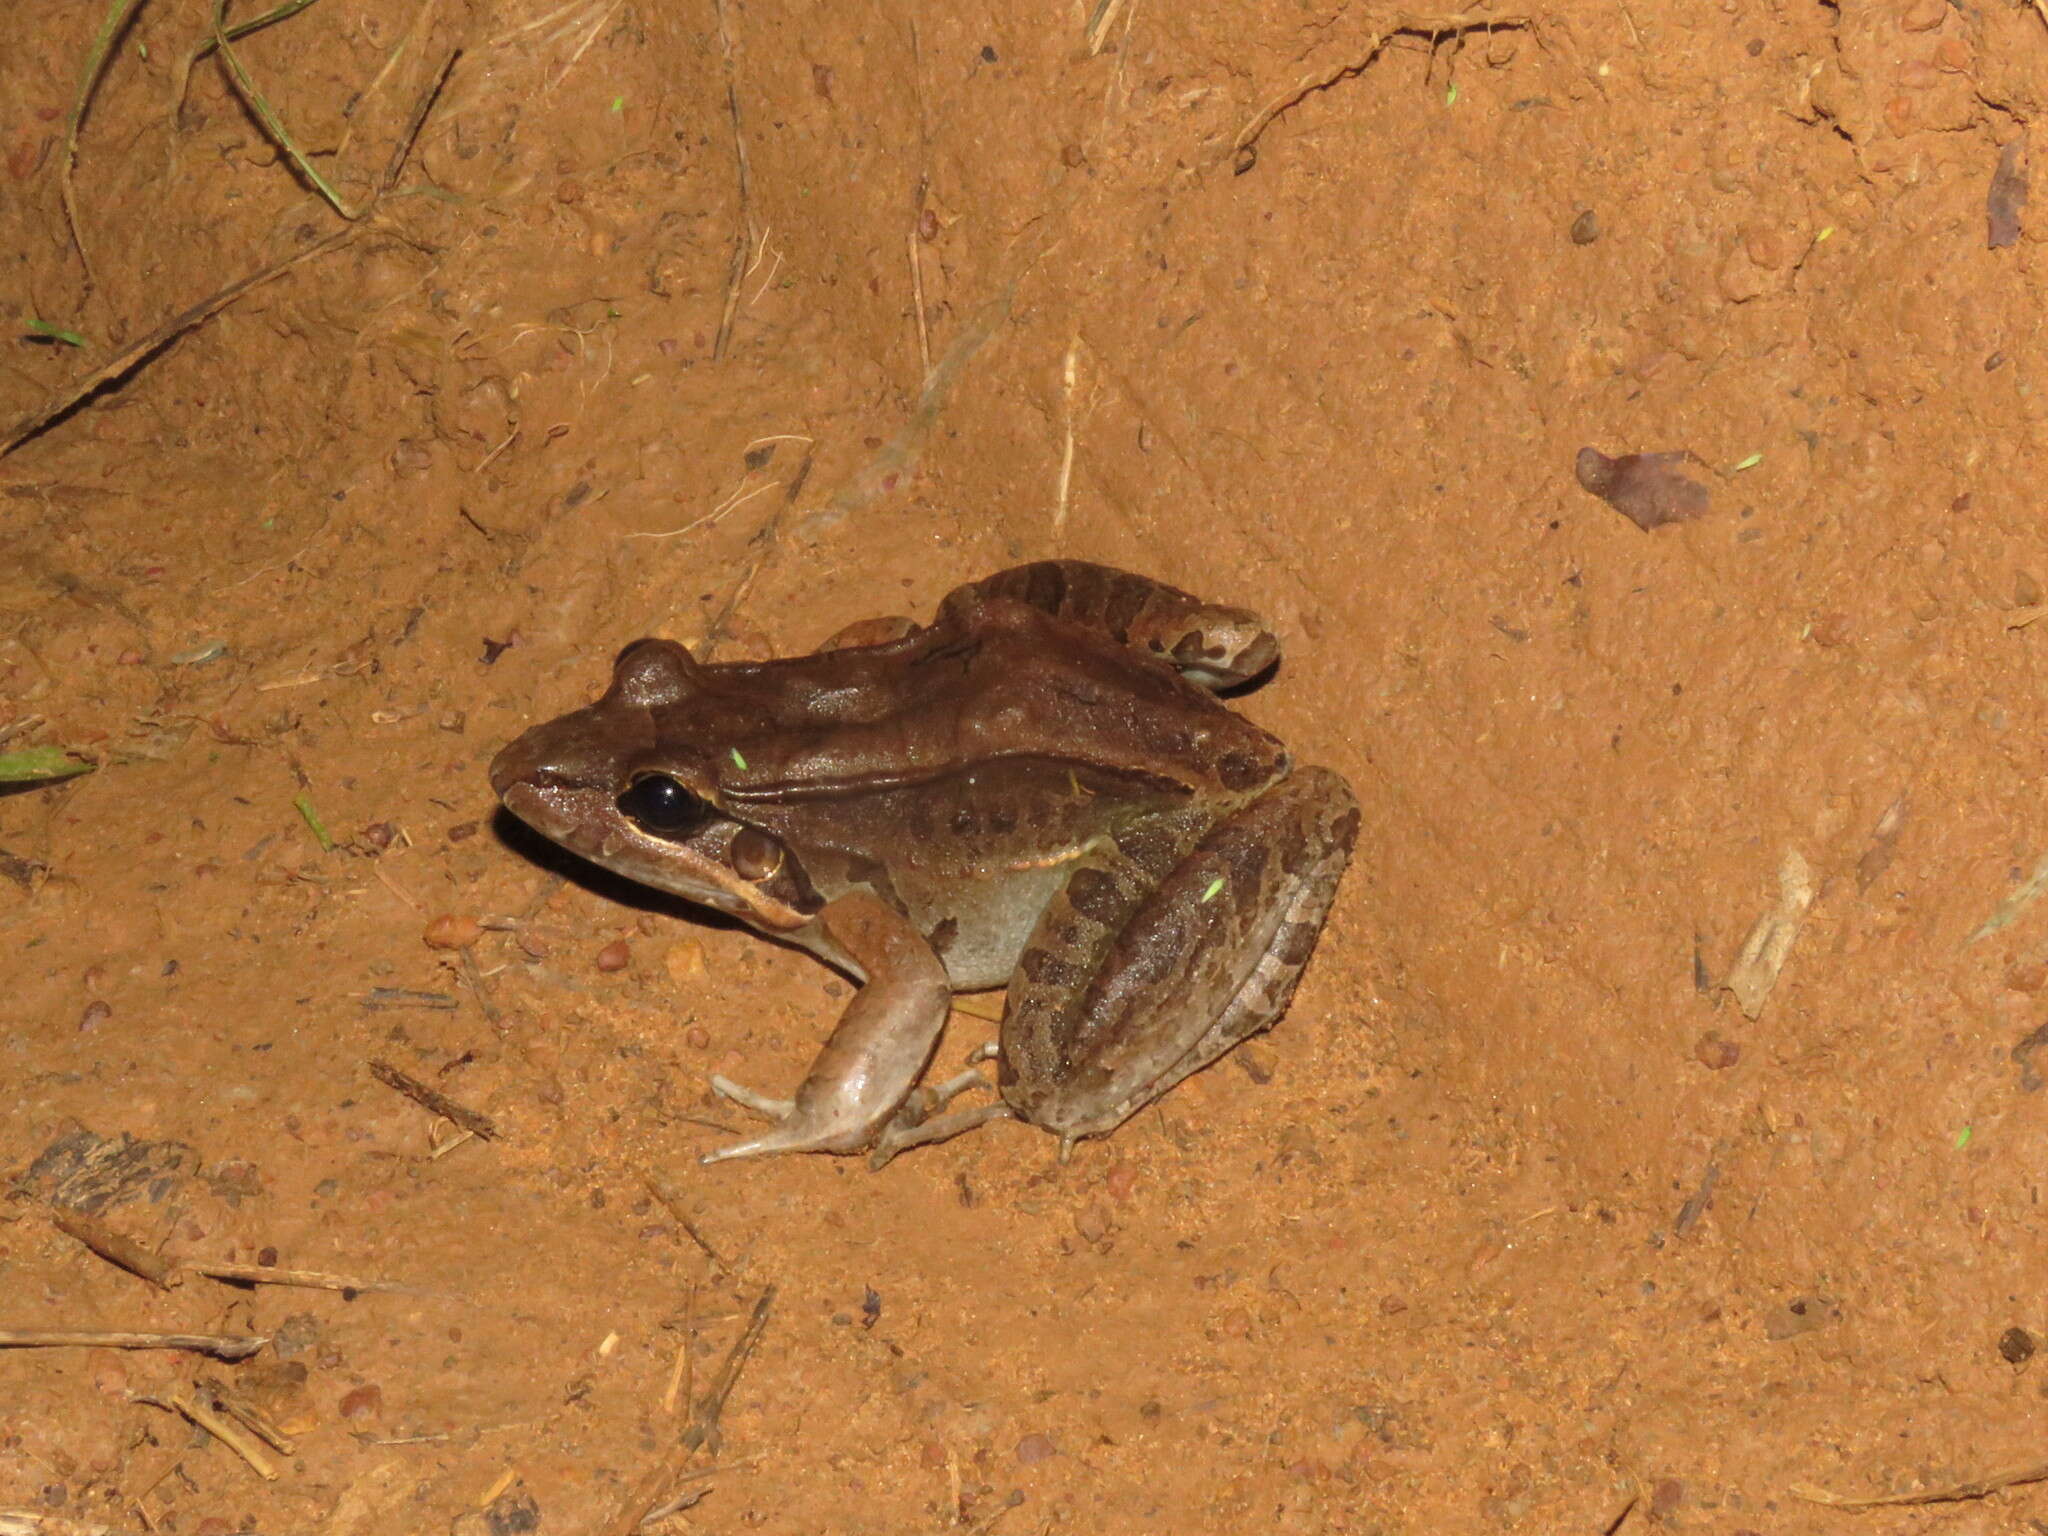 Image of Bolivian White-lipped Frog